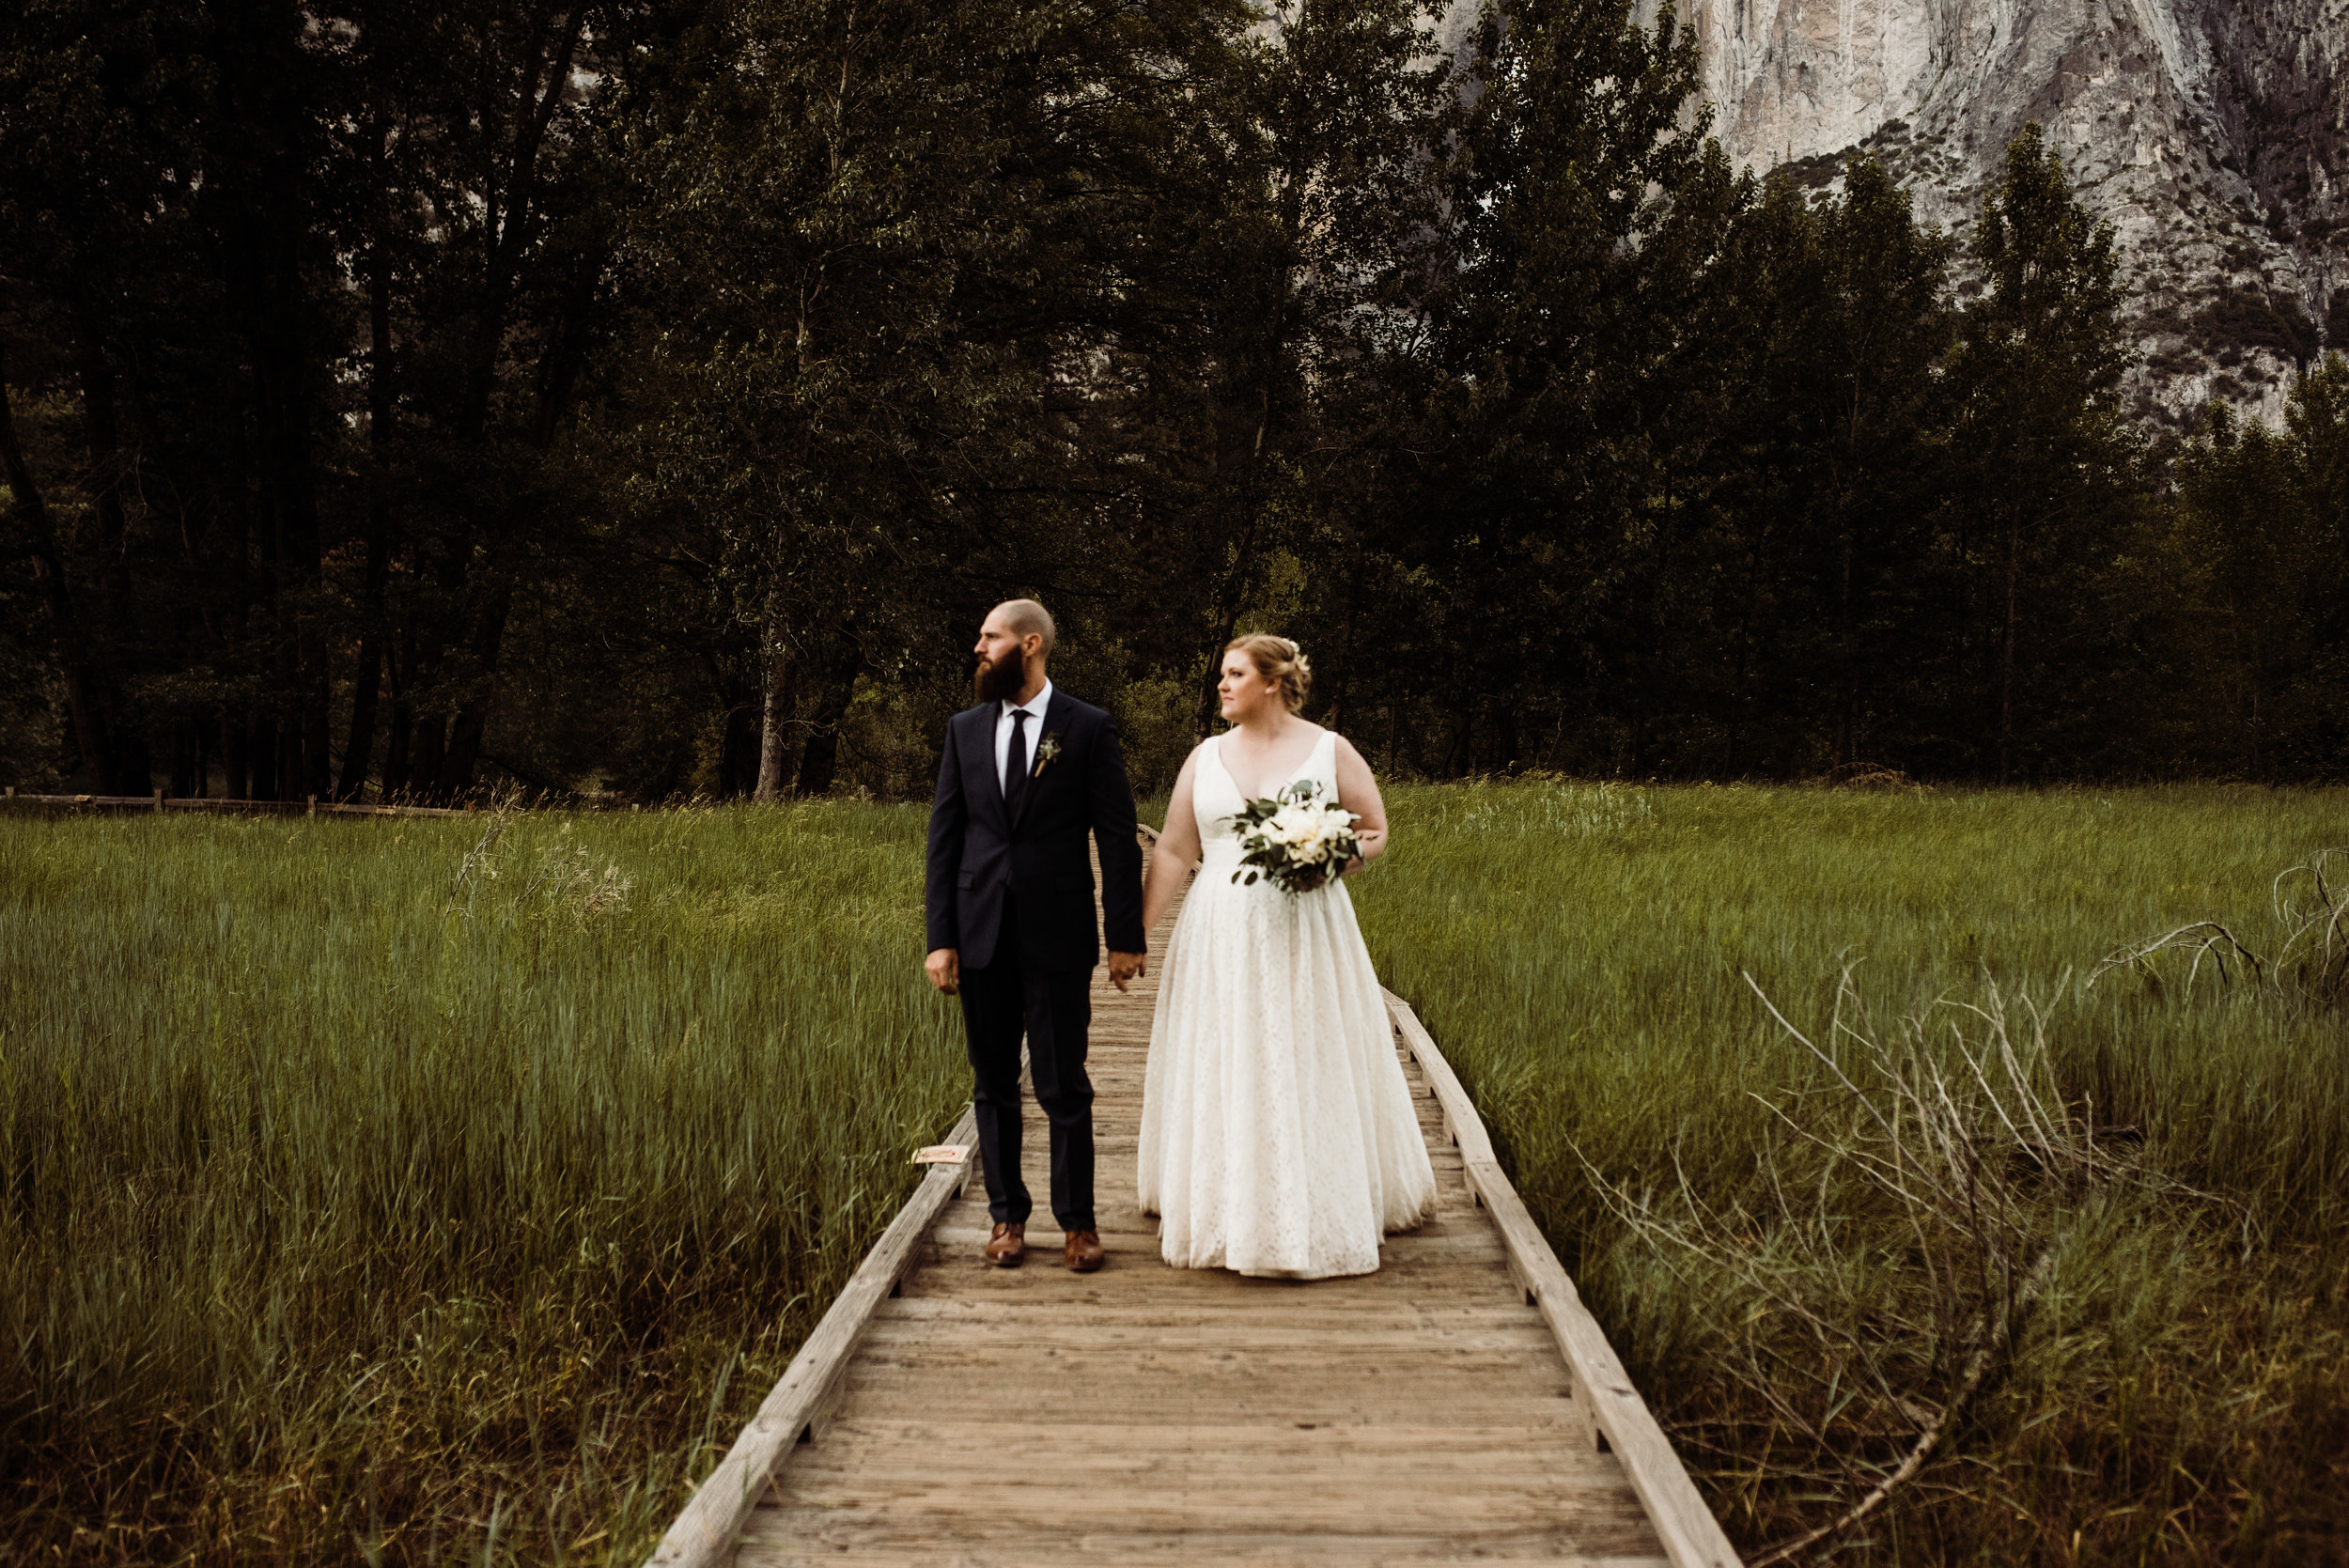 Adventurous couple exploring Yosemite Valley after their elopement ceremony